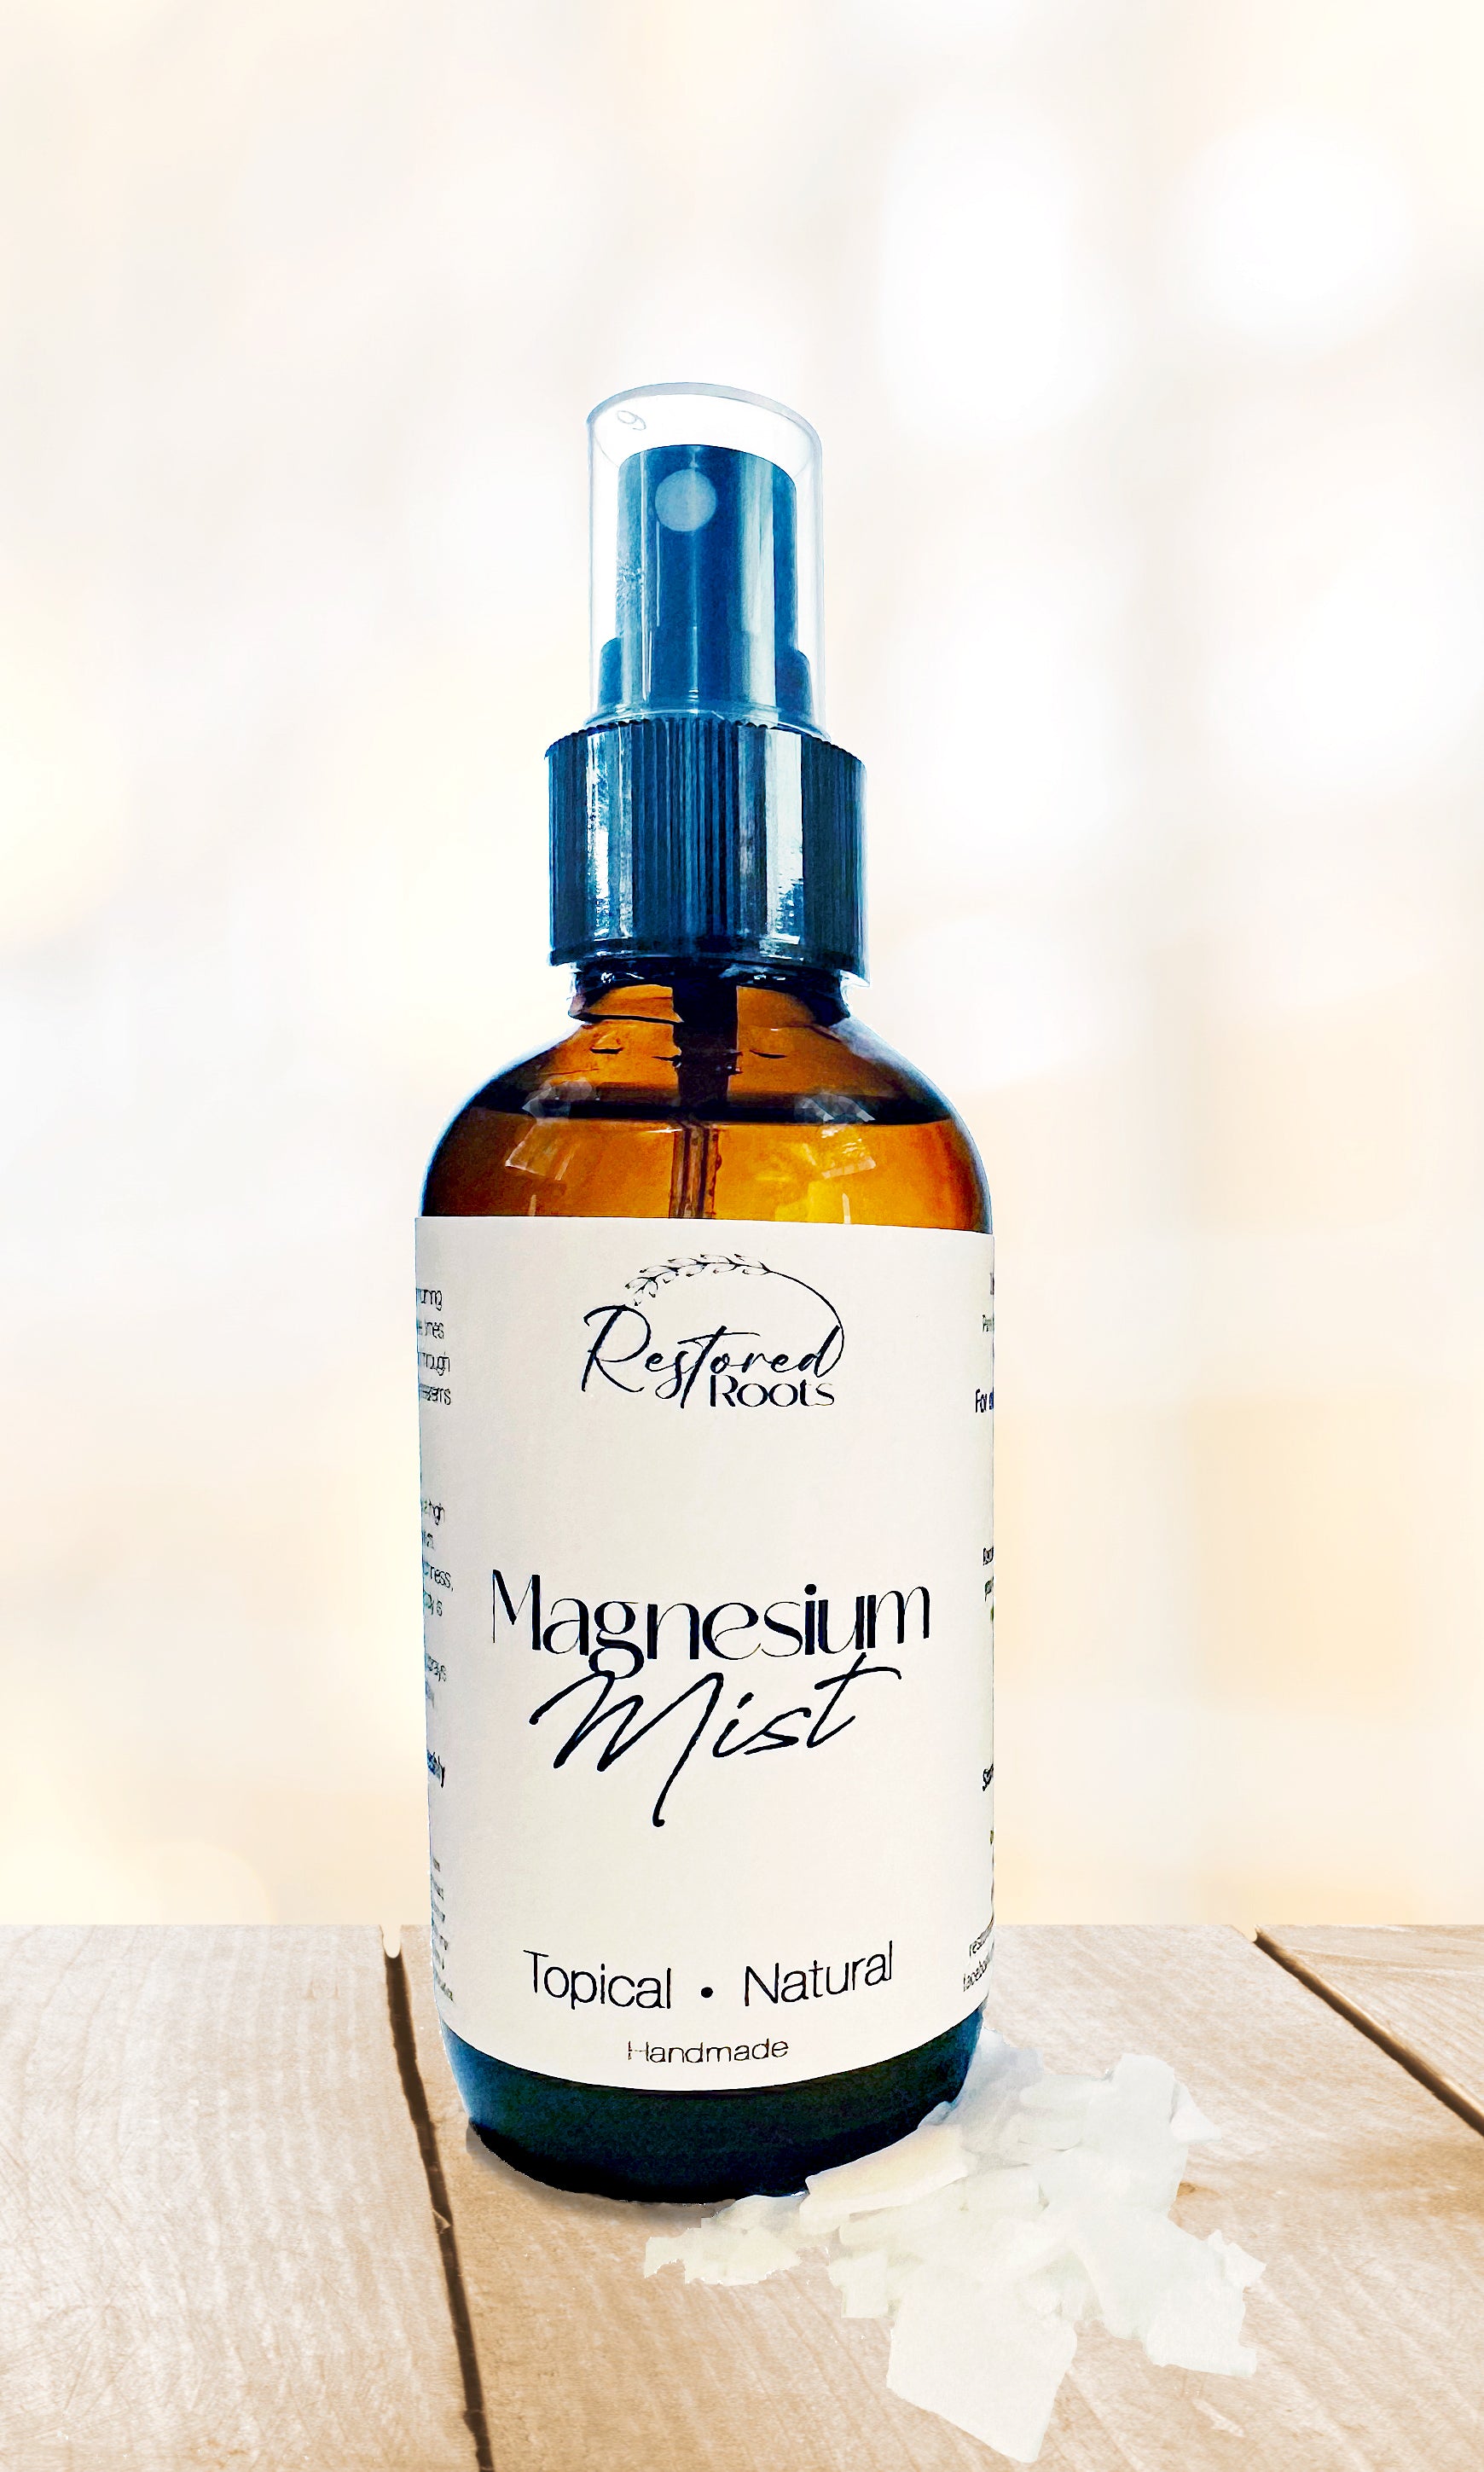 Magnesium mist is a refreshing revitalizing mist created with pure magnesium chloride. Nourishing your skin and body leaving you feeling refreshed, revitalized, and ready to take on the day.